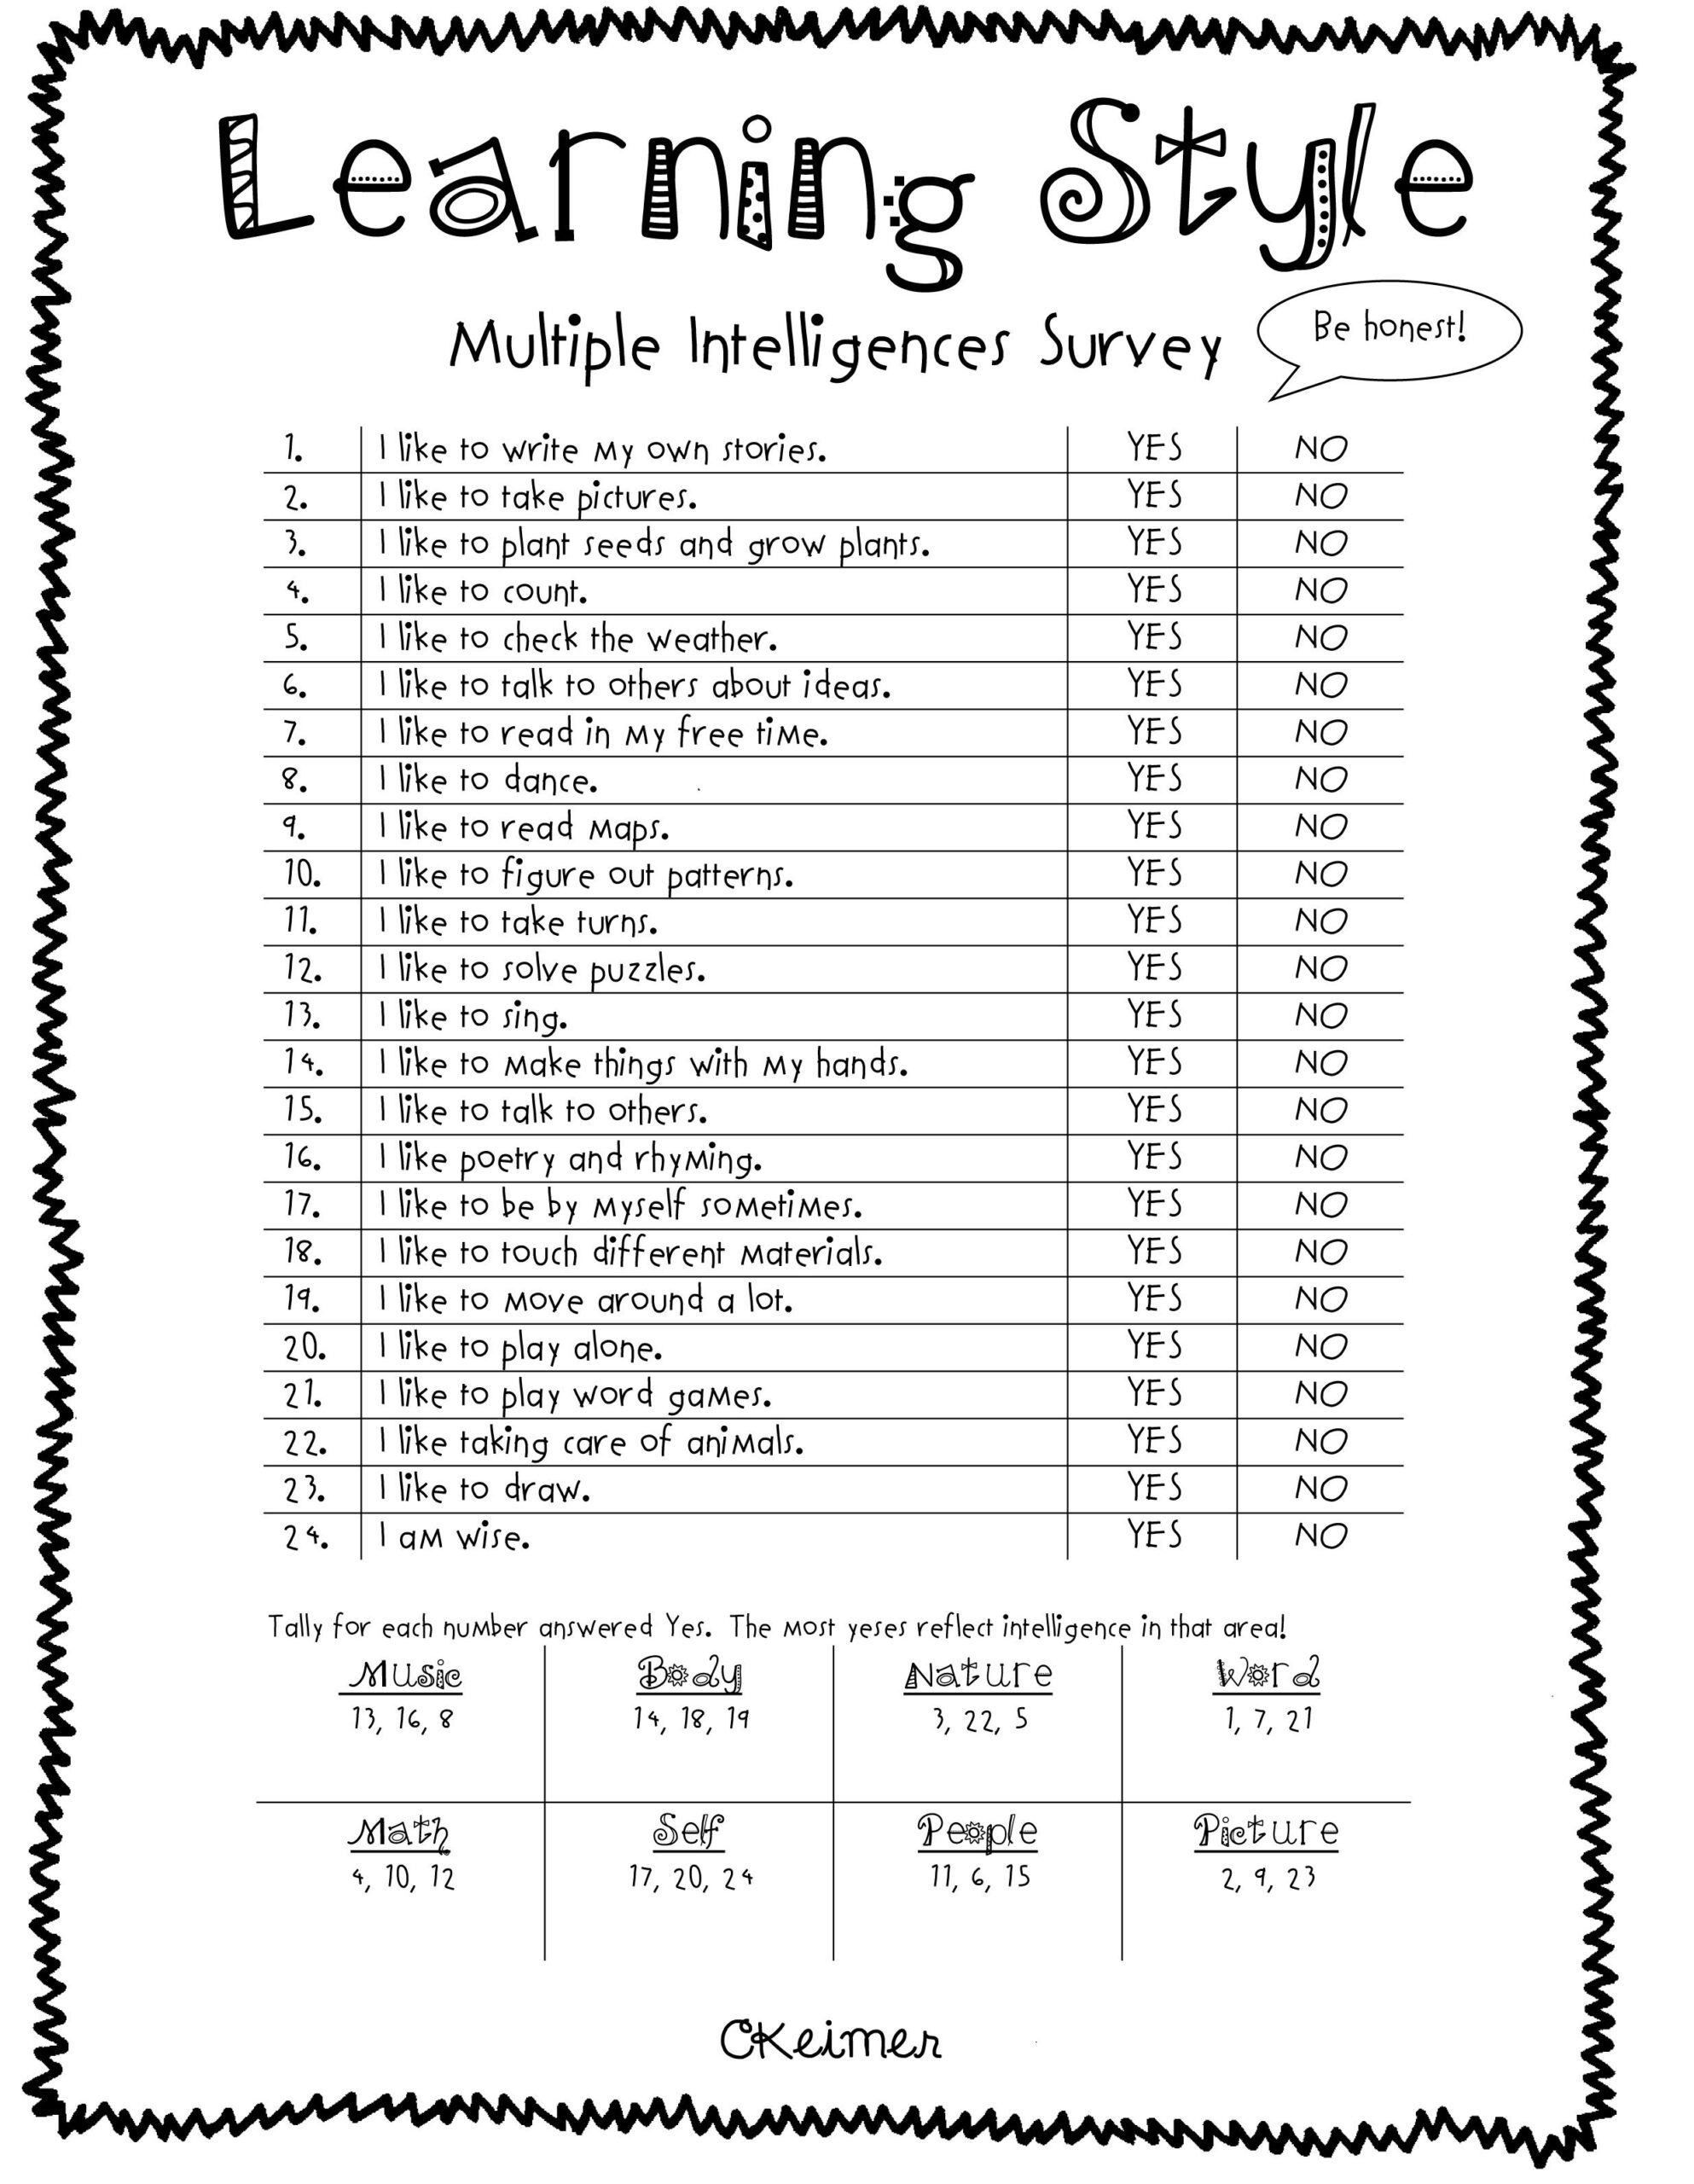 All About Me Activities A Multiple Intelligences Assessment Multiple Intelligences Student Survey Learning Styles - Free Learning Style Inventory For Students Printable